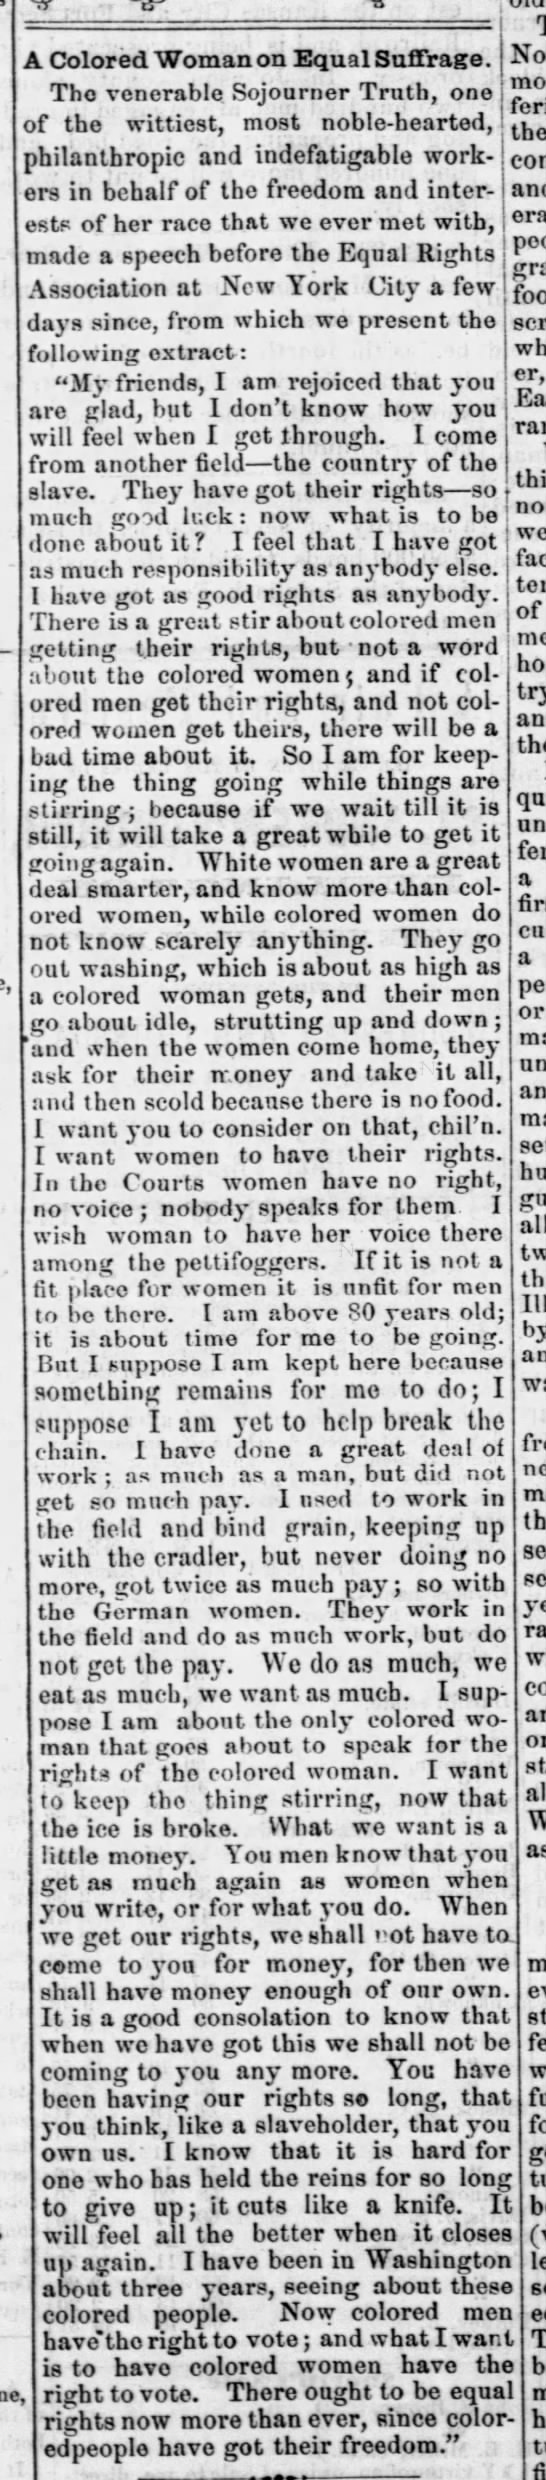 Sojourner Truth speaks at the Equal Rights Association in 1867 - 